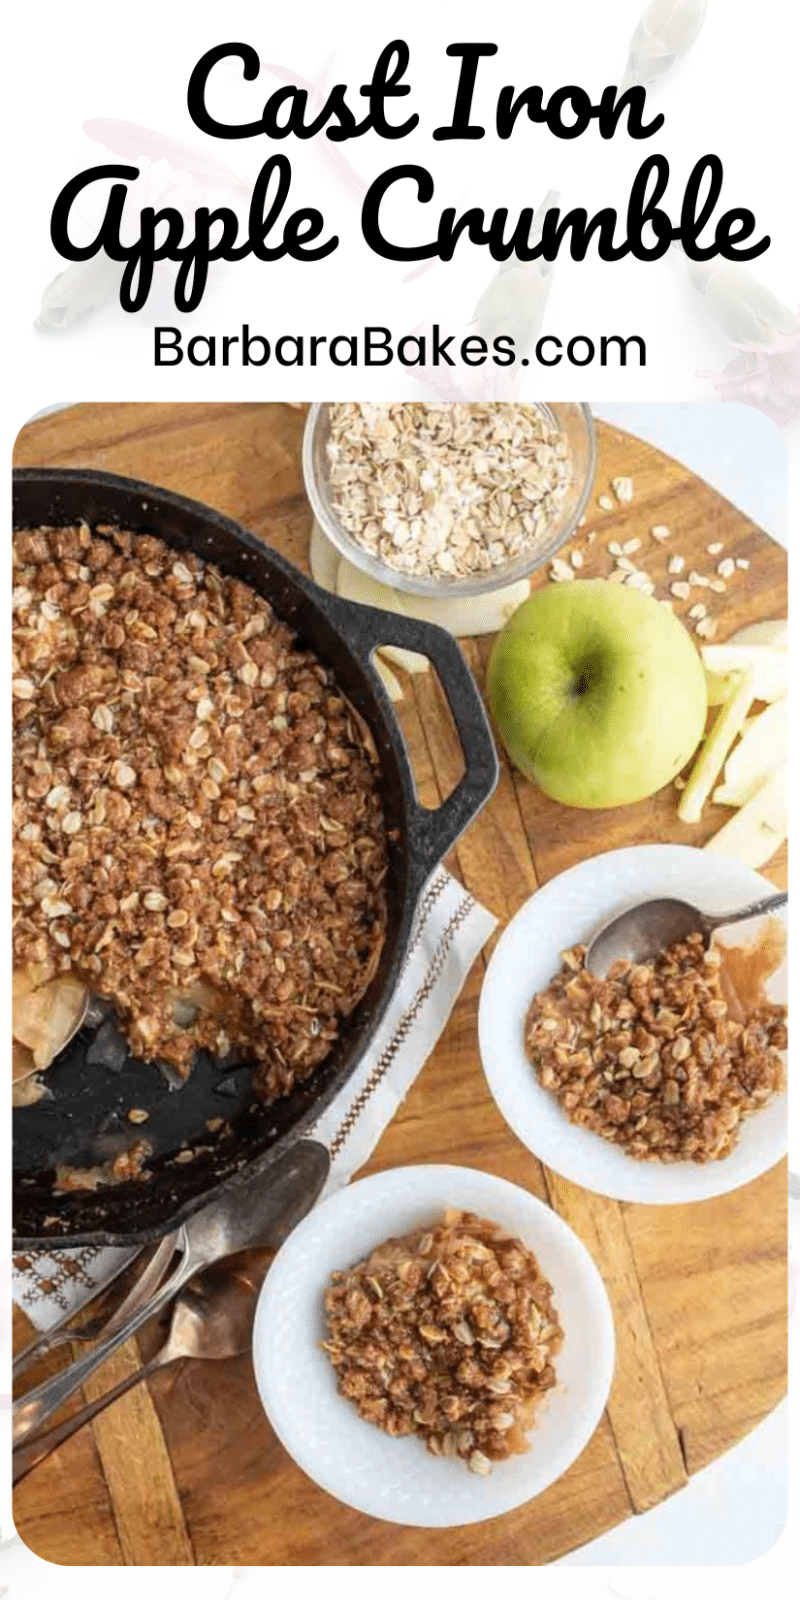 Pinterest pin that reads "Cast Iron Apple Crumble" with photos of a cast iron pan with baked crumble & servings dished onto a plate with ice cream